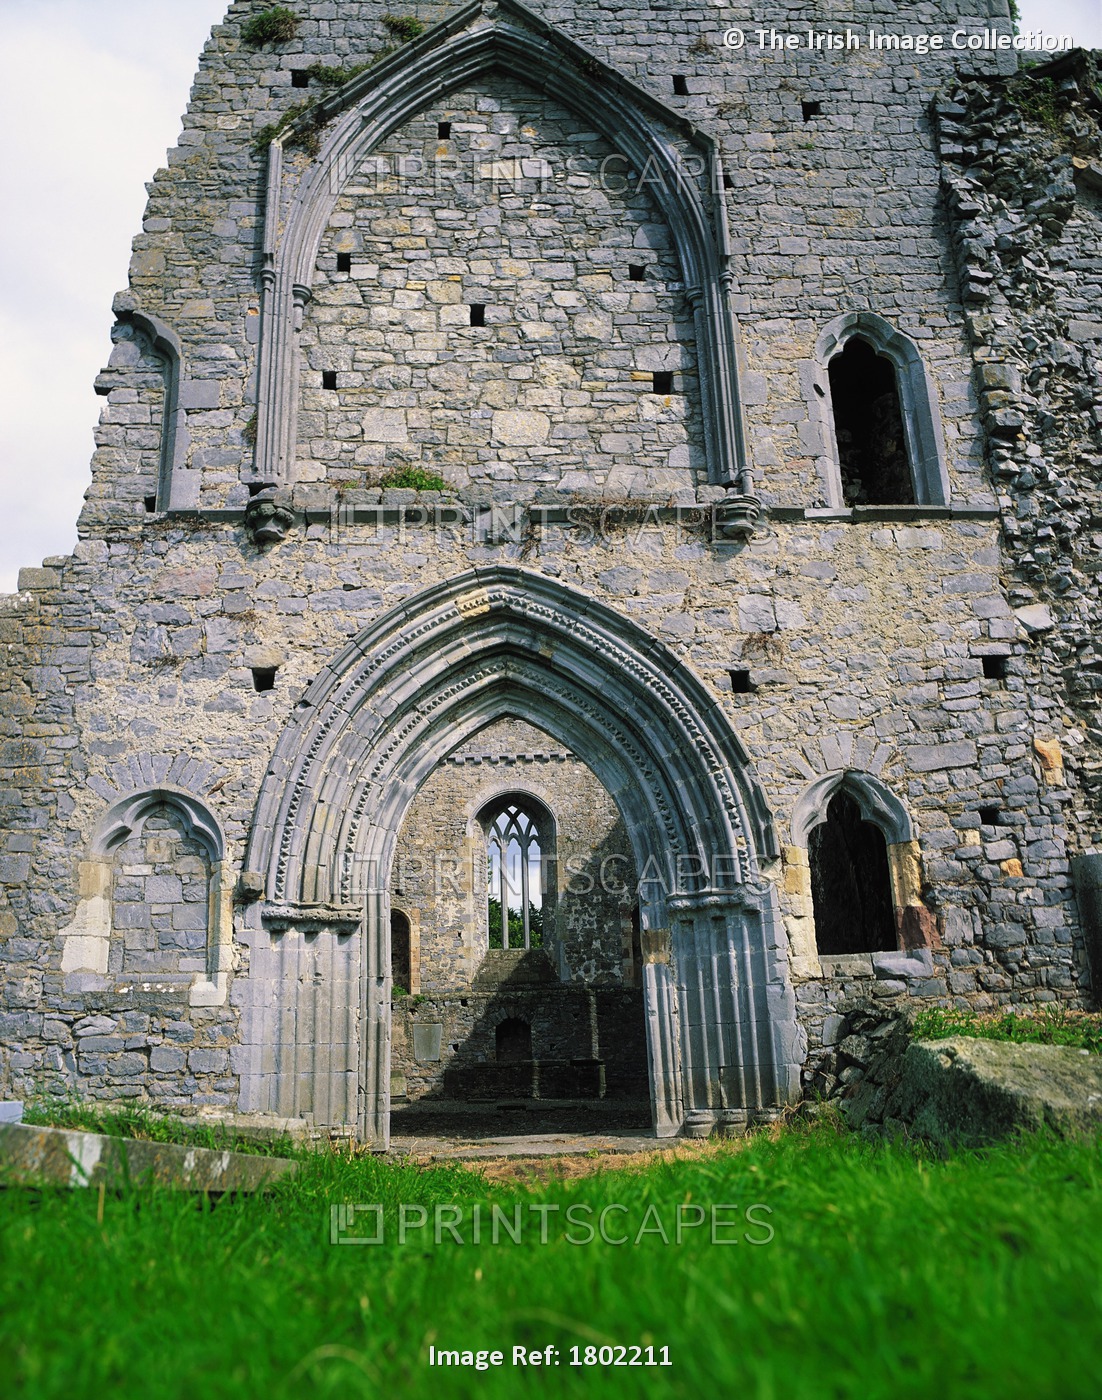 Athassel Priory, Cashel, Co Tipperary, Ireland, 13Th Century, Doorway To A ...